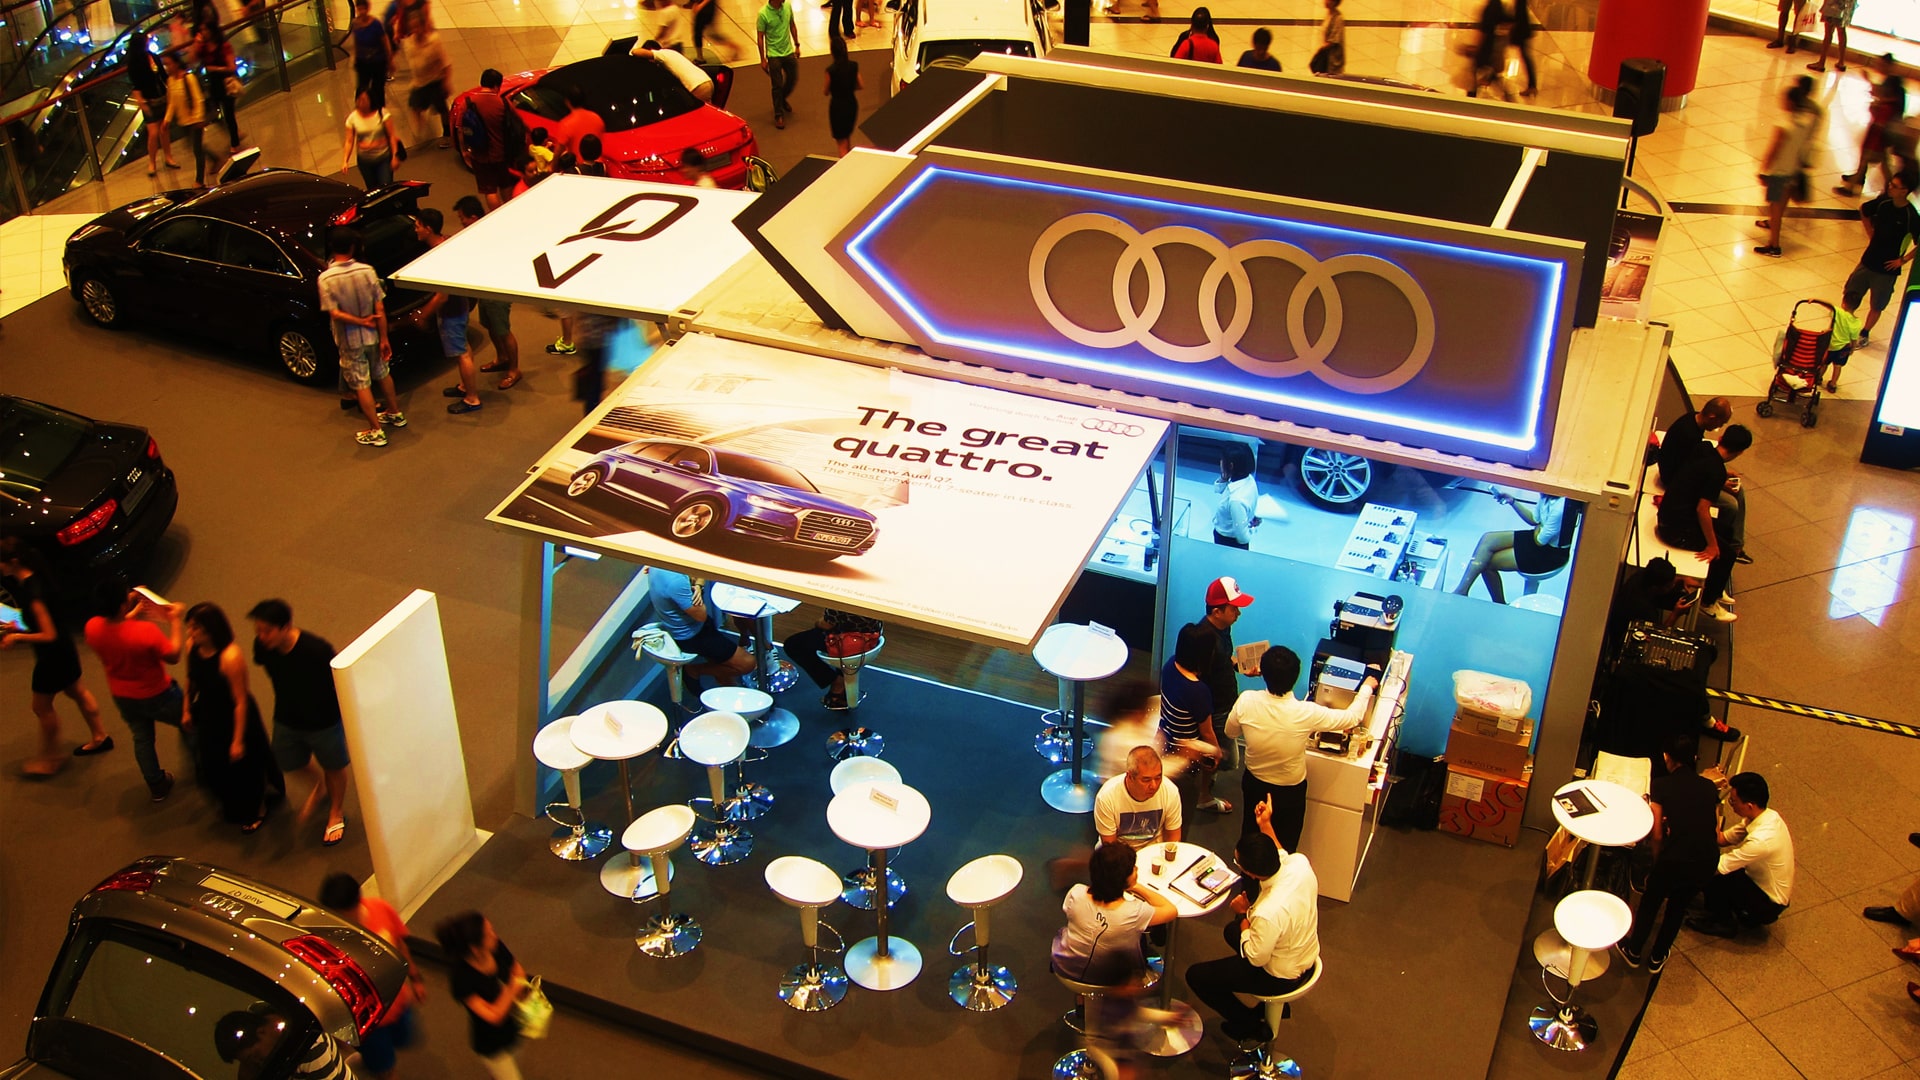 tsc_opt-images_customized-containers_audi-car-launch-1920x1080-04-min